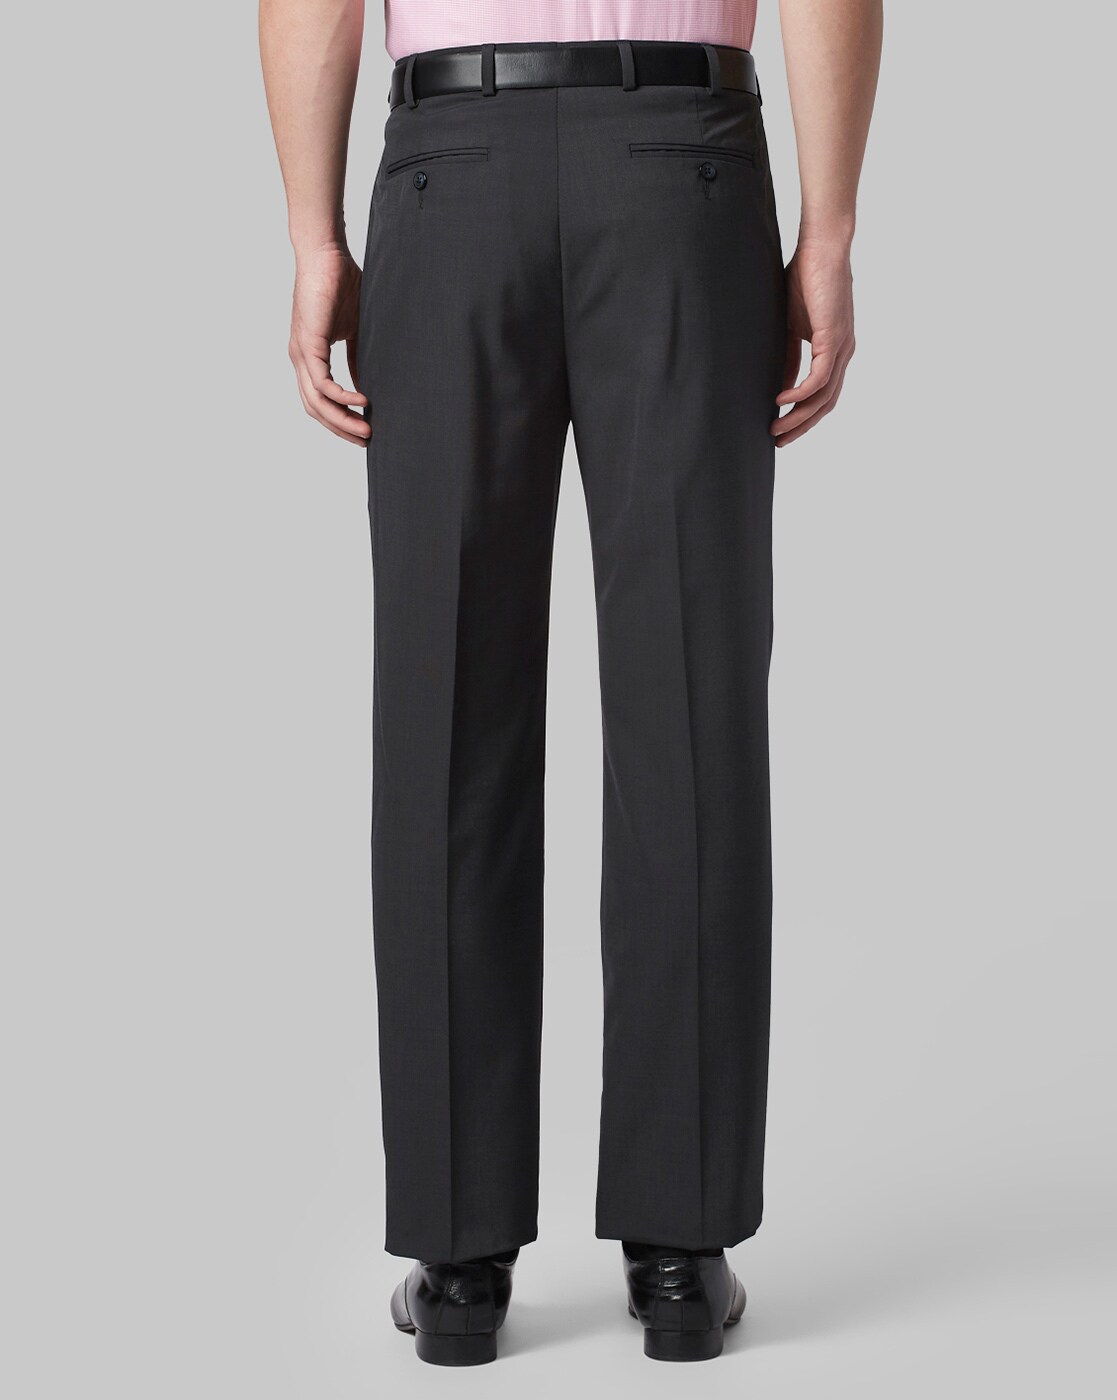 Buy Loewe green slim fit men's trousers at the Park Avenue boutique. Loewe  green slim fit men's trousers from the best world brands with delivery  across Ukraine › Park Avenue